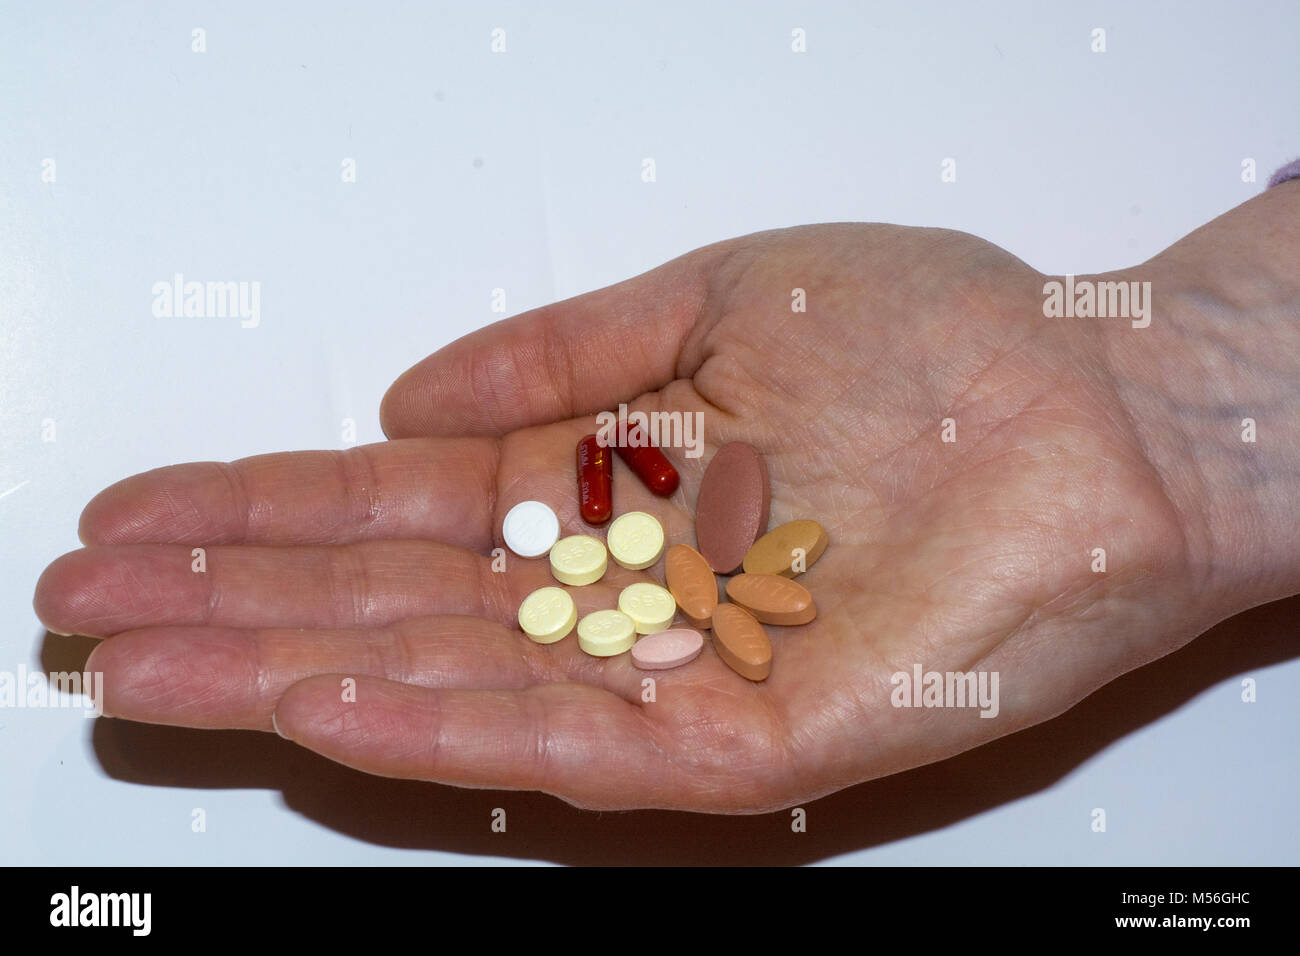 A number of tablets used to treat Parkinson's disease in the palm of someone's hand Stock Photo